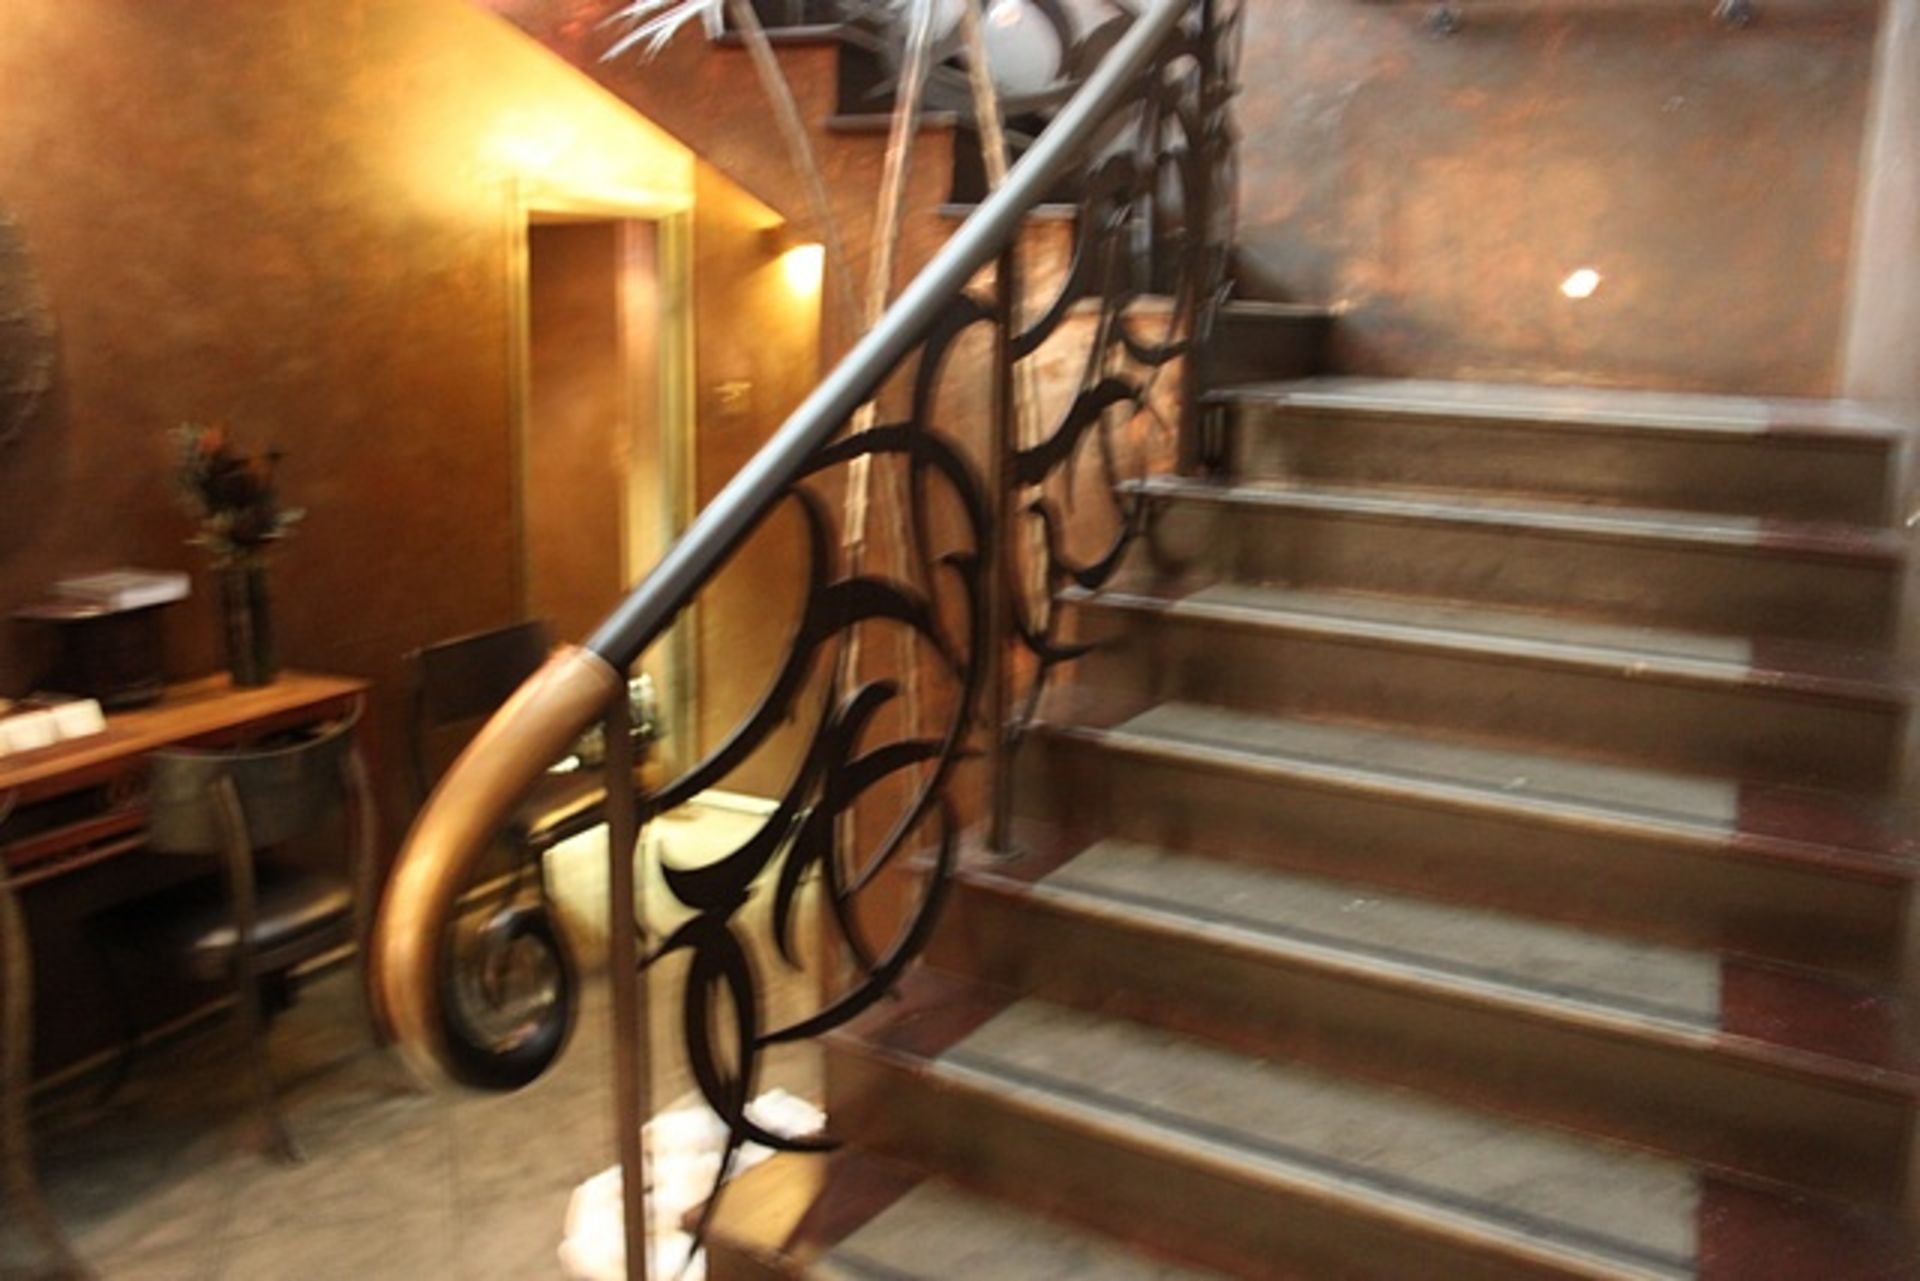 Balustrade staircase railing 2.4m x 2.4m curved to match staircase constructed of metal with